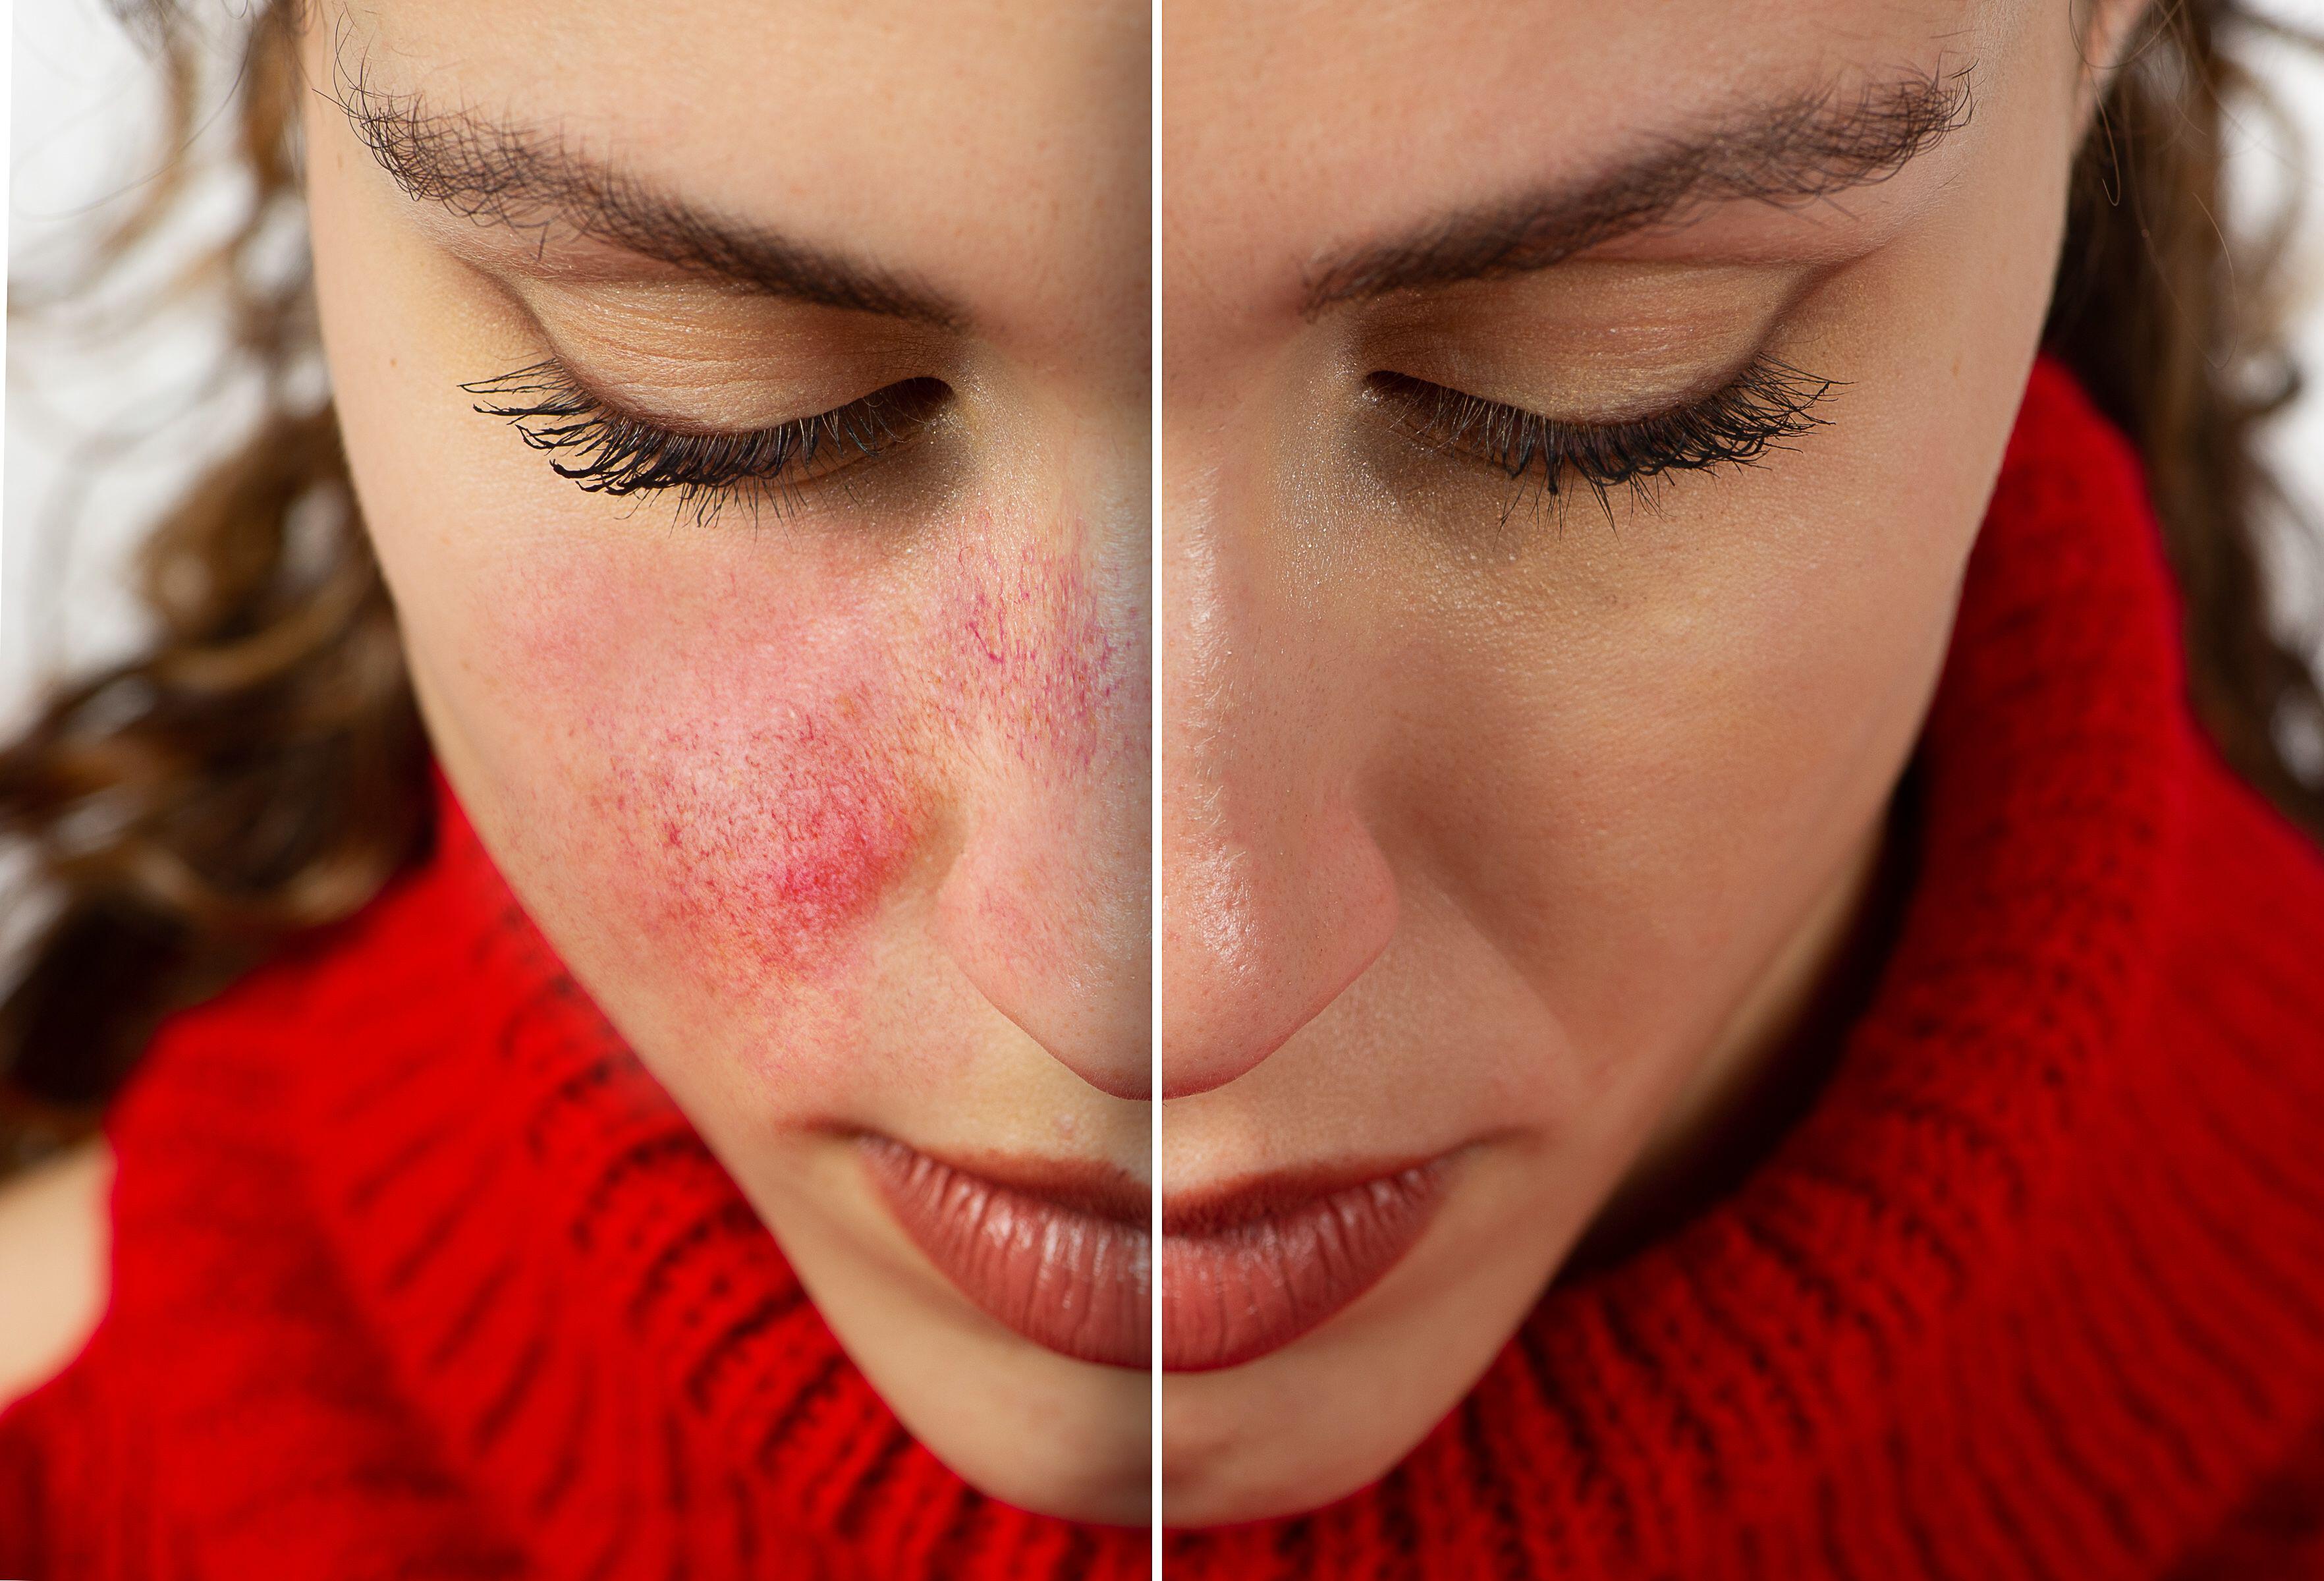 A close up view on the cheeks of a young Caucasian woman suffering from acneiform rosacea